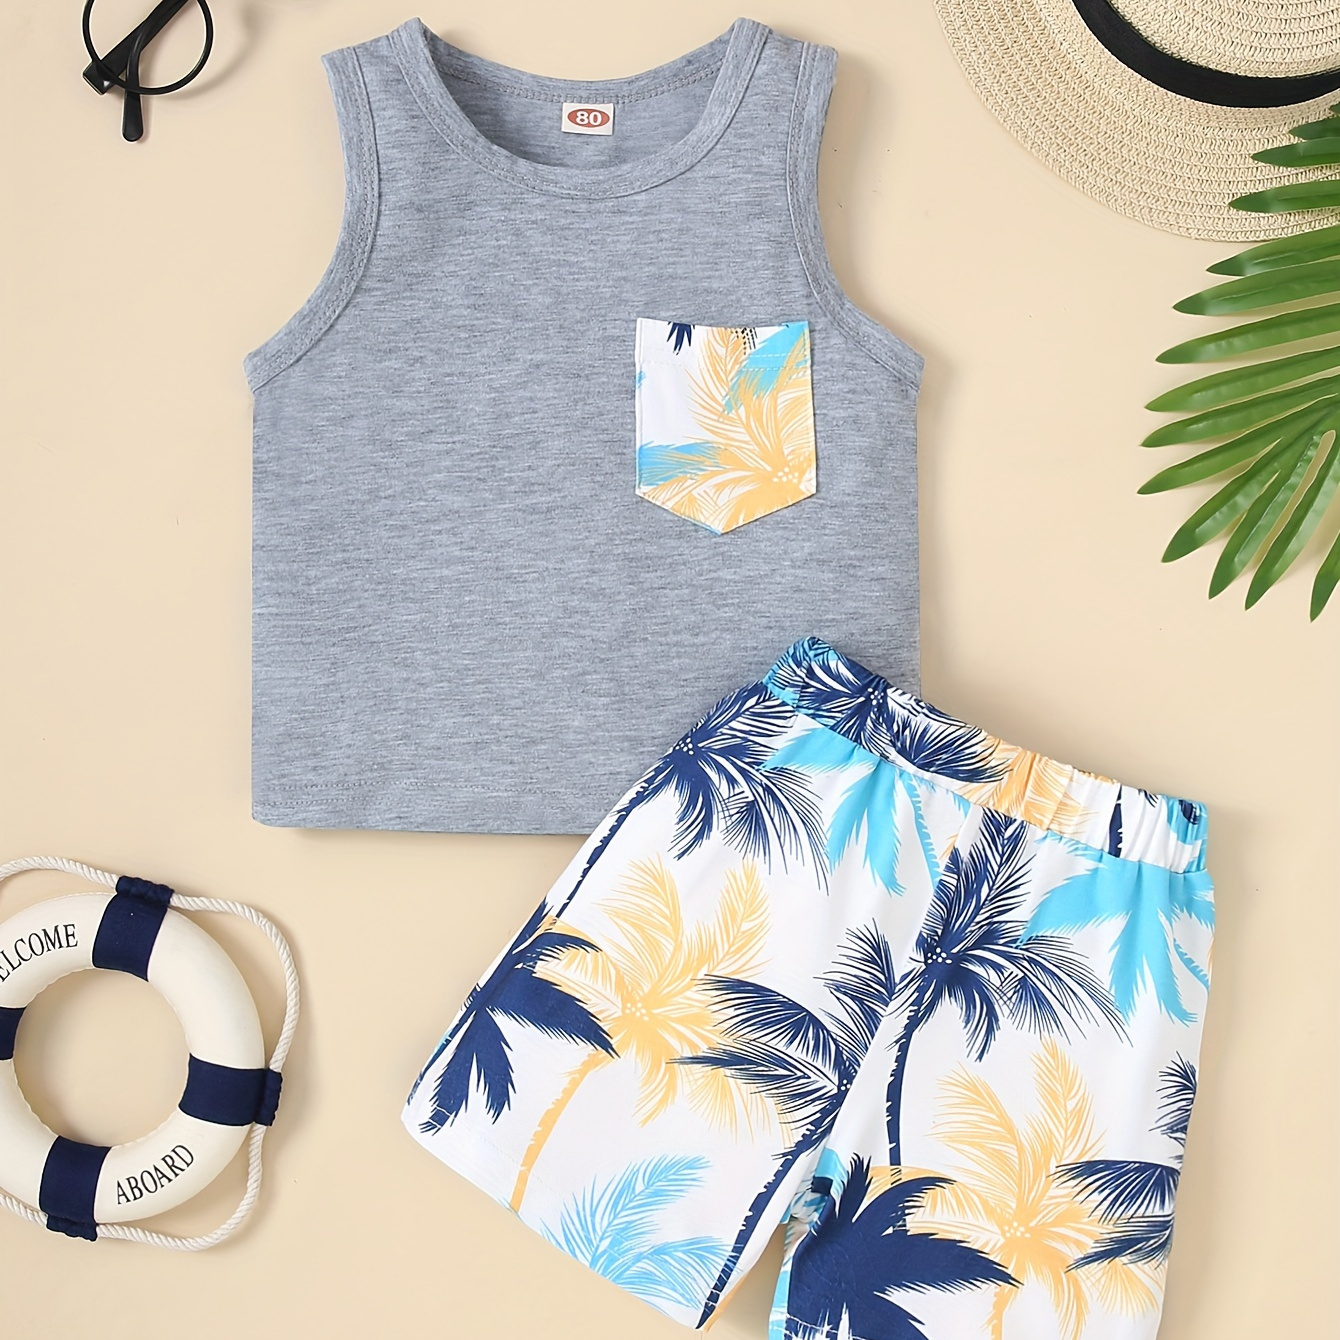 

Baby's Coconut Tree Print 2pcs Summer Casual Outfit, Pocket Patched Tank Top & Shorts Set, Toddler & Infant Boy's Clothes